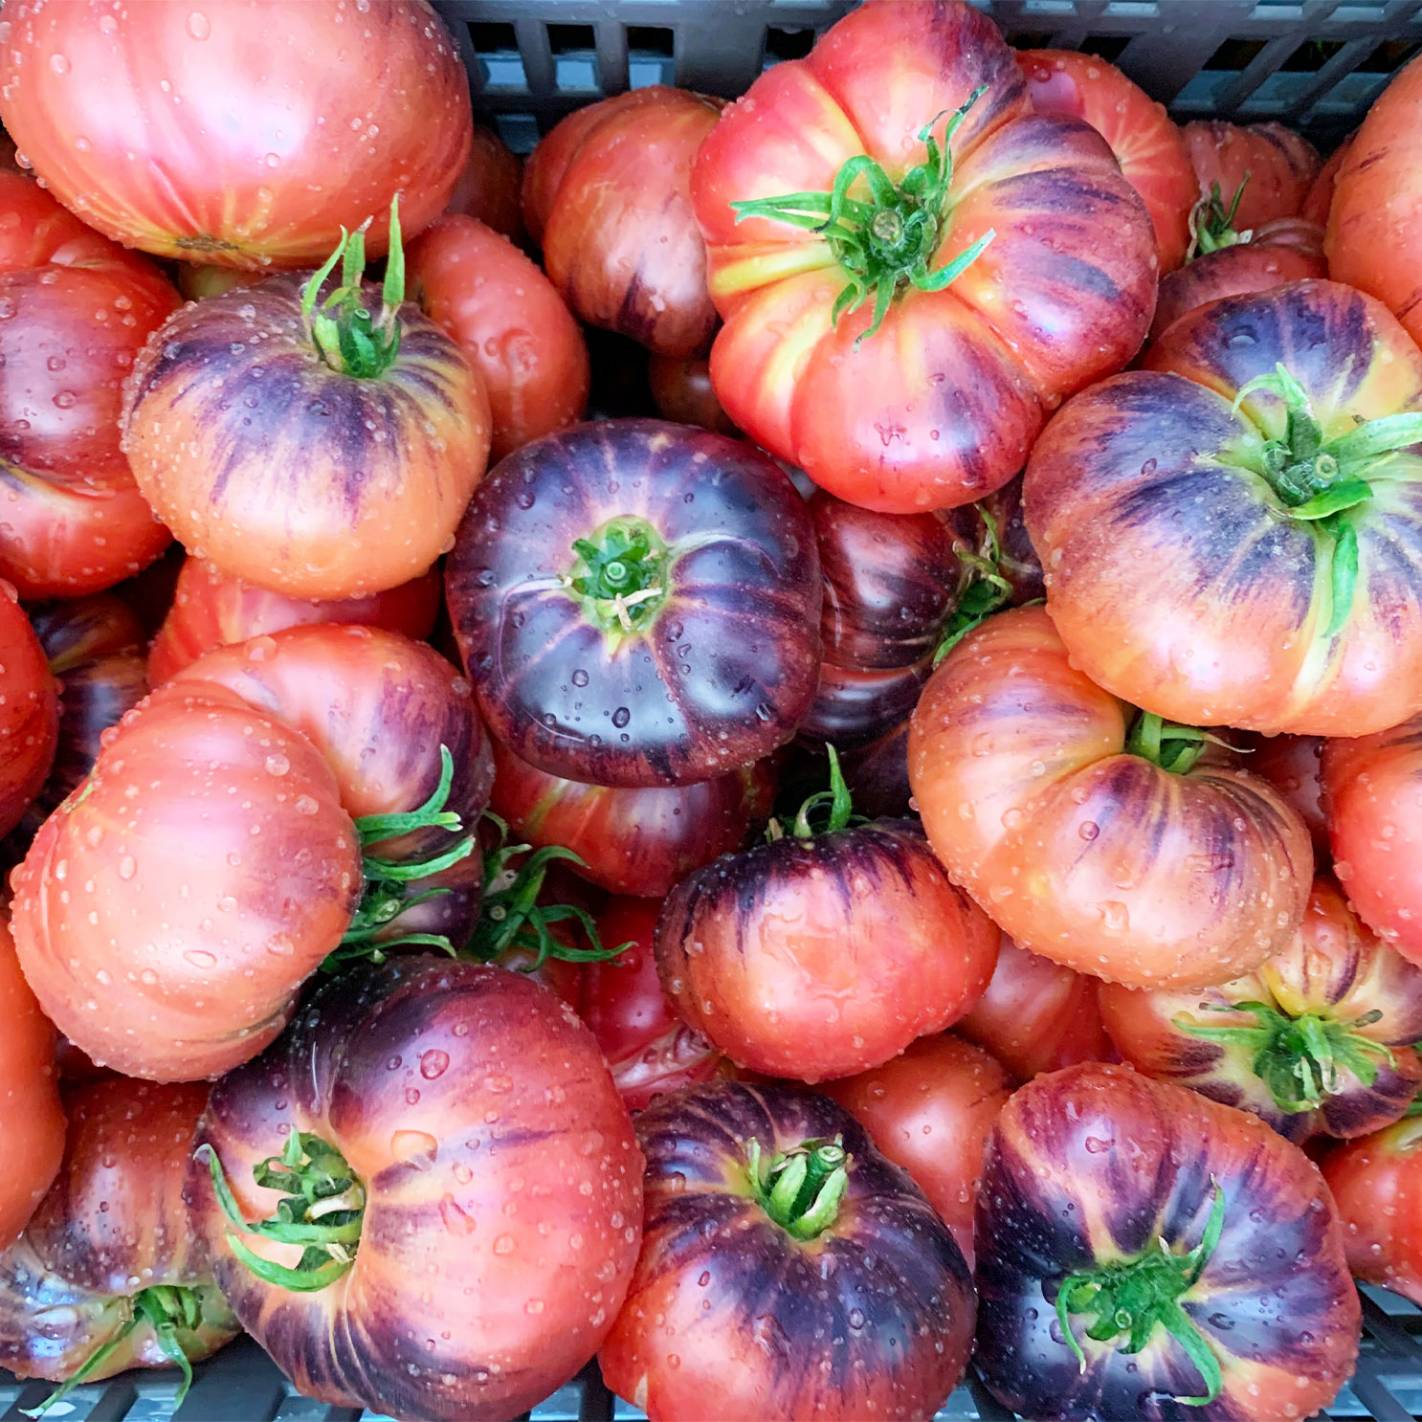 Indigo Blue Beauty Heirloom Tomatoes Information and Facts